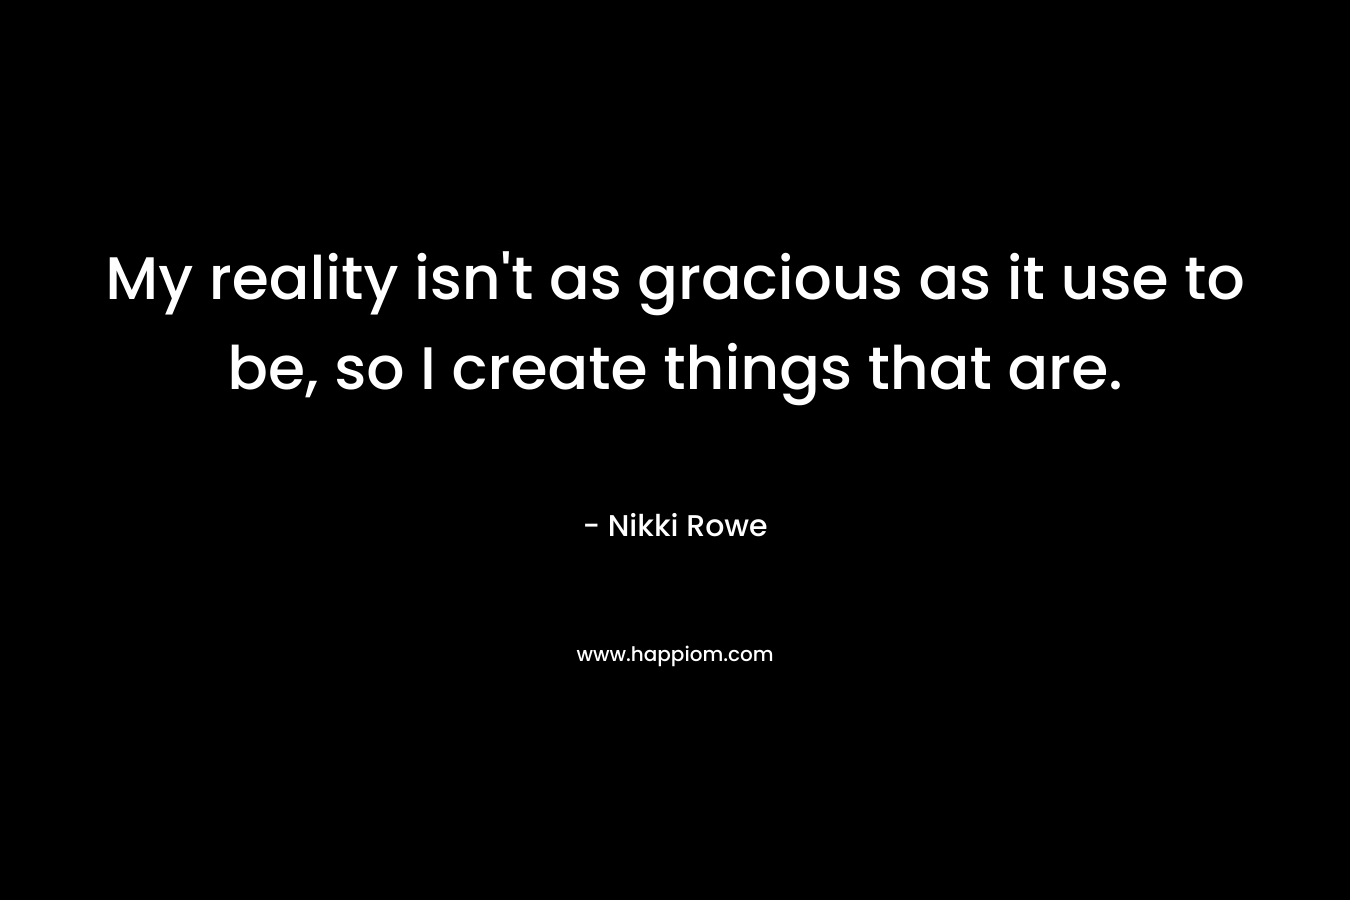 My reality isn't as gracious as it use to be, so I create things that are.